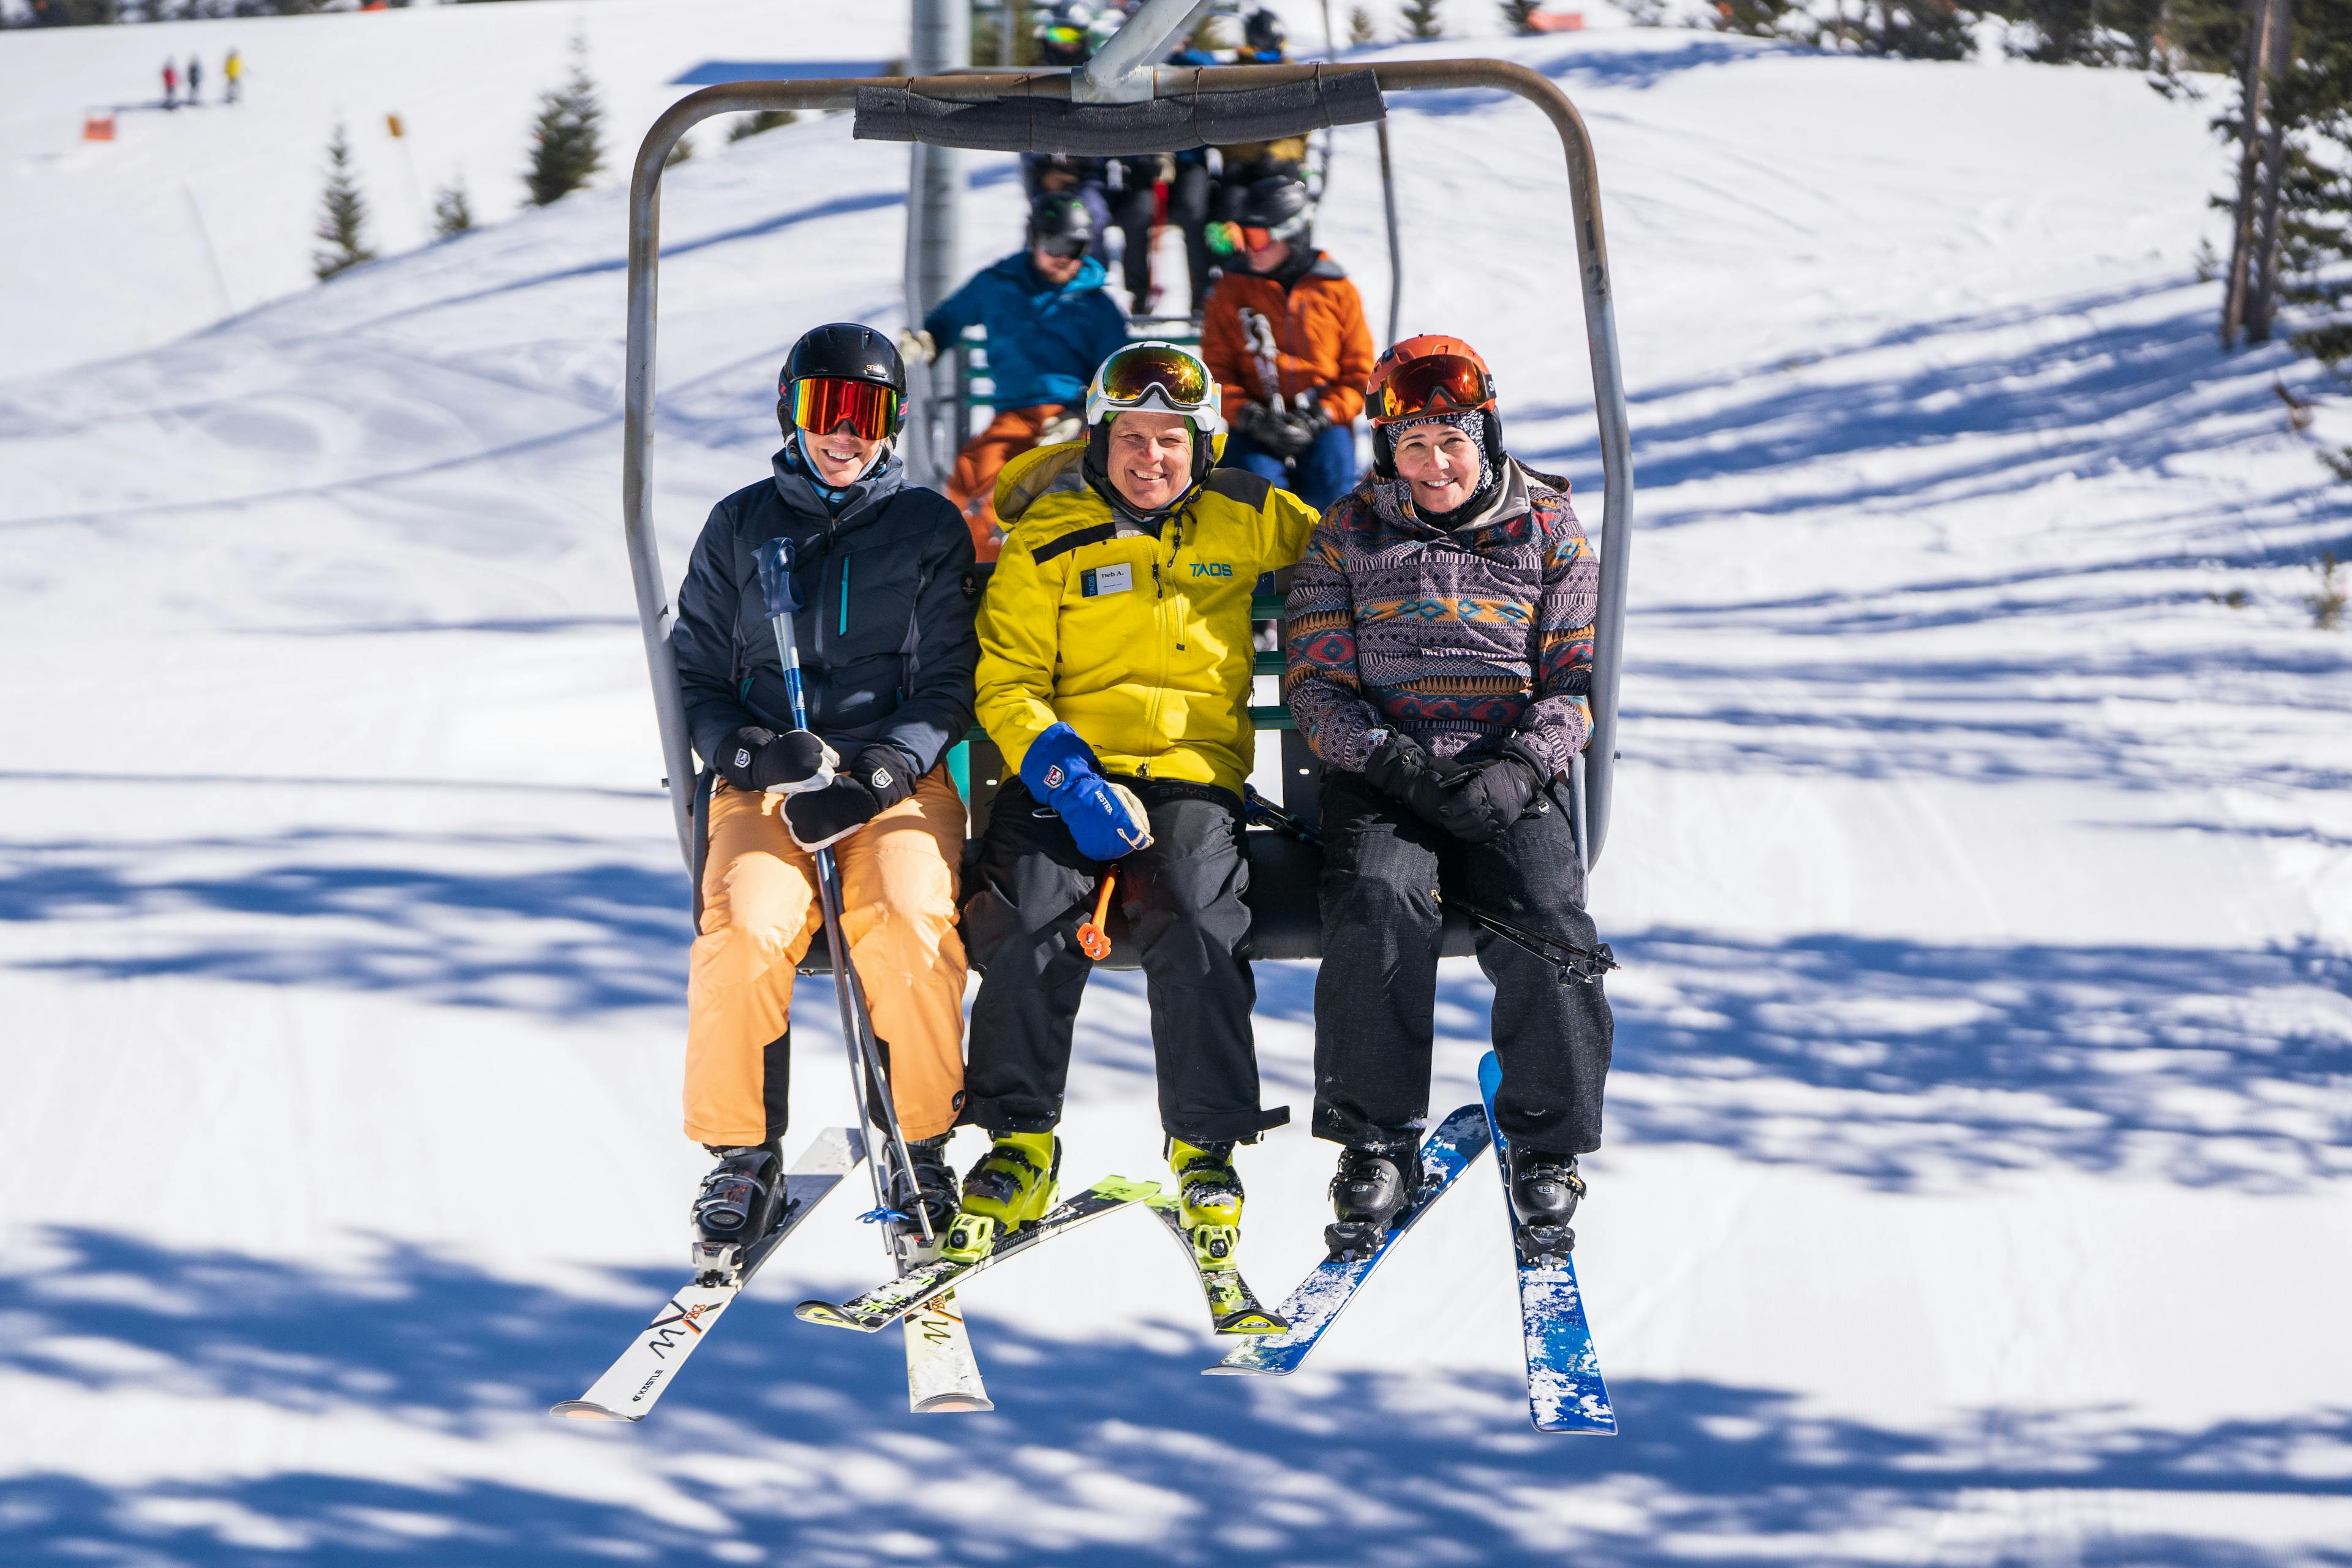 Snowsports instructor shares smiles on the lift with their students